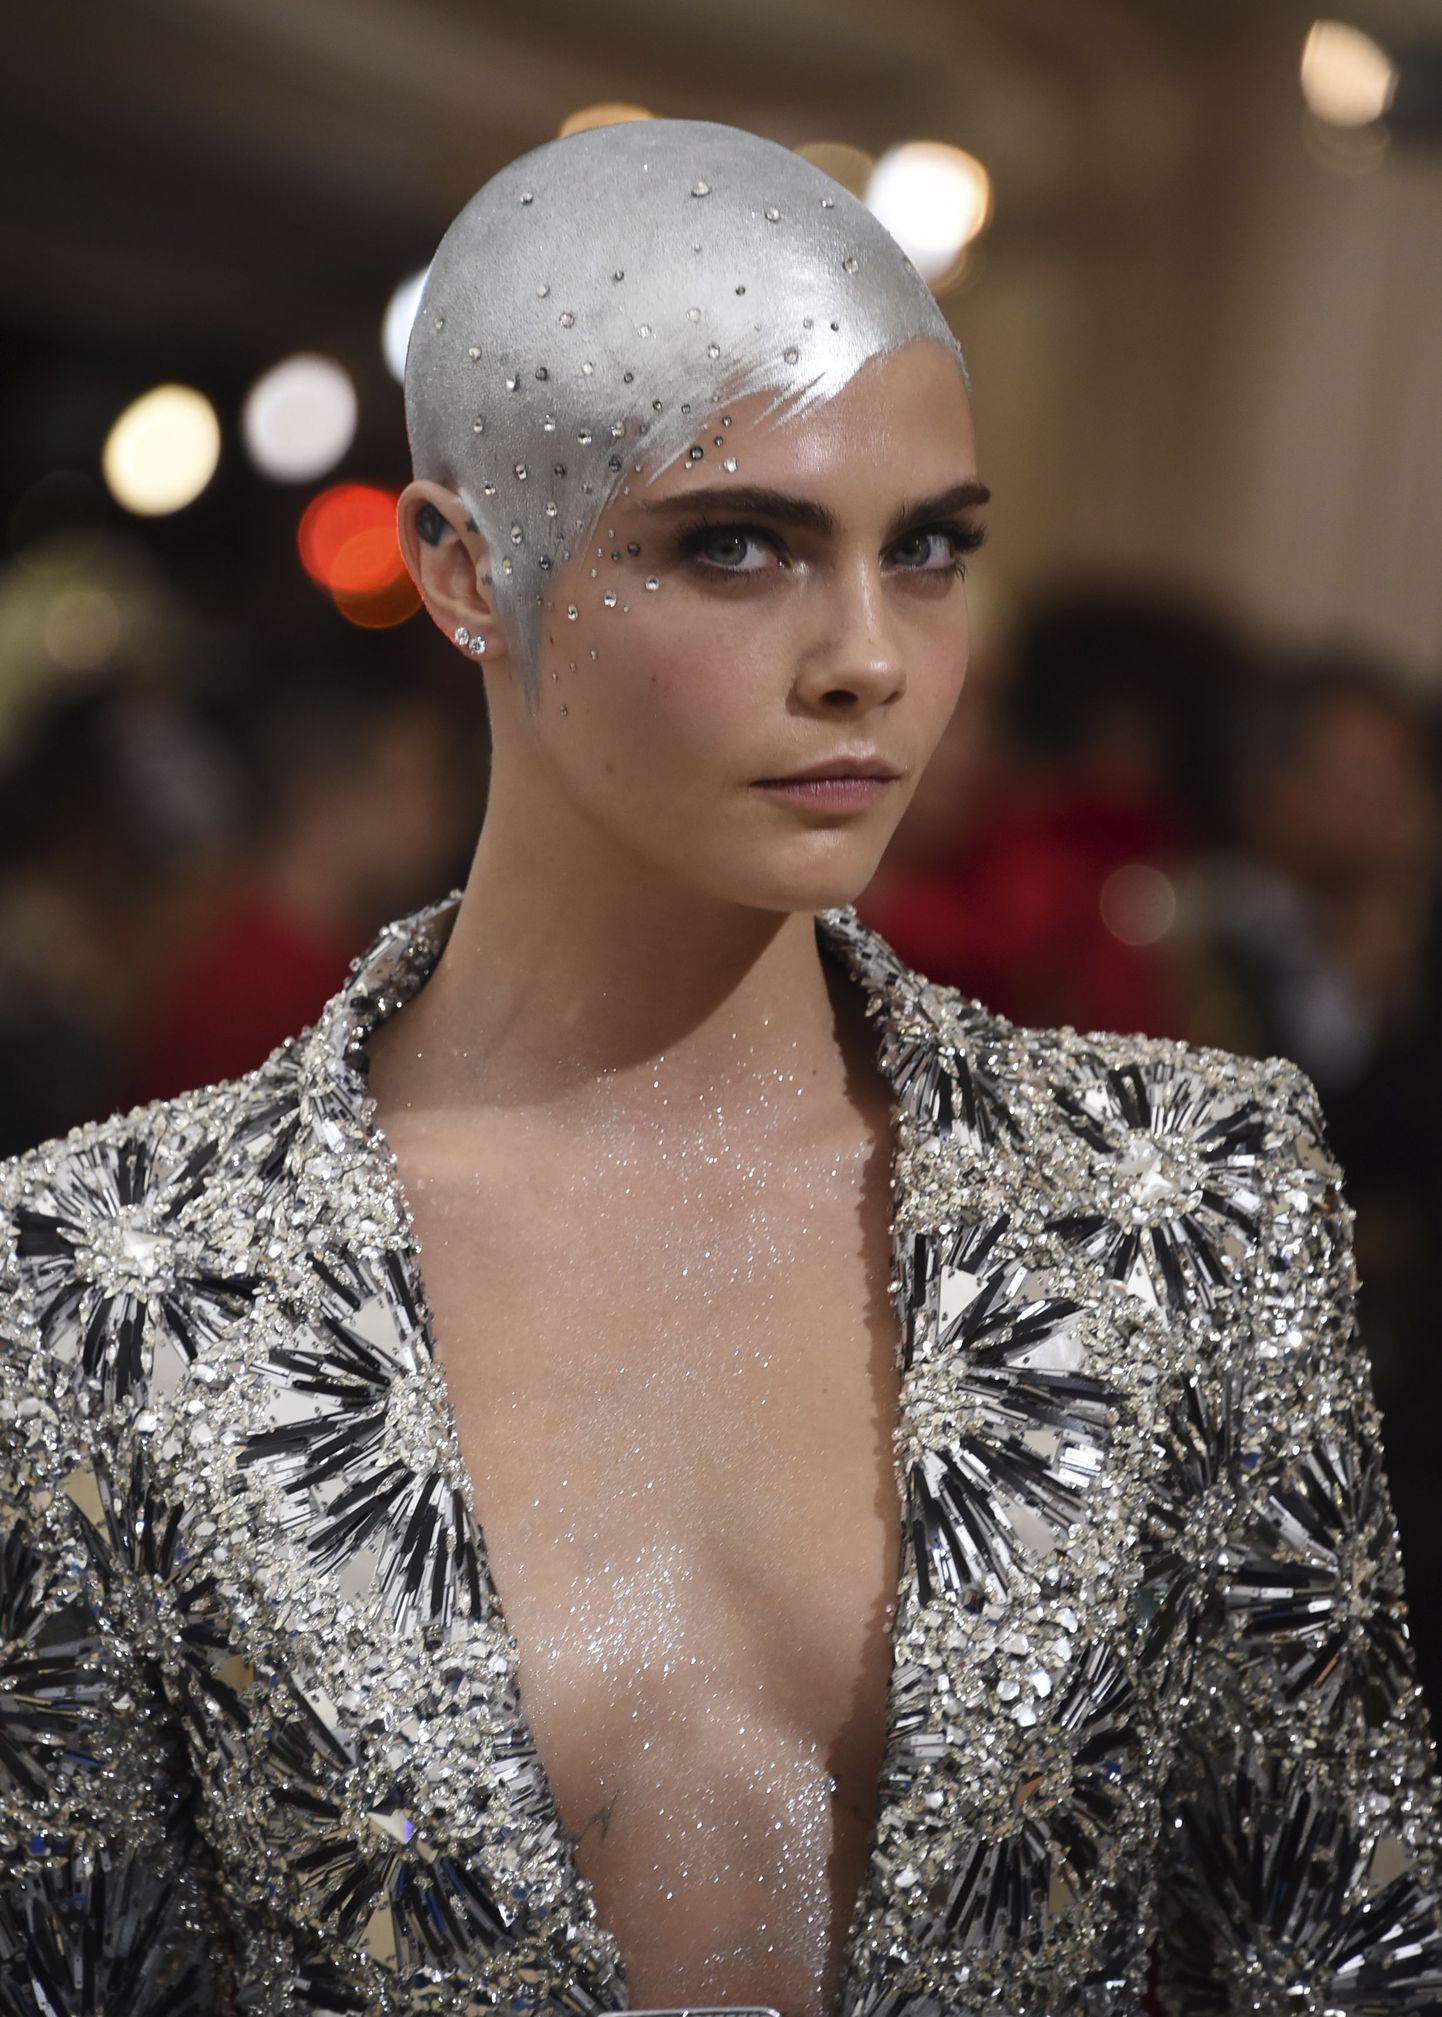 Cara Delevingne attends The Metropolitan Museum of Art's Costume Institute benefit gala celebrating the opening of the Rei Kawakubo/Comme des Garv